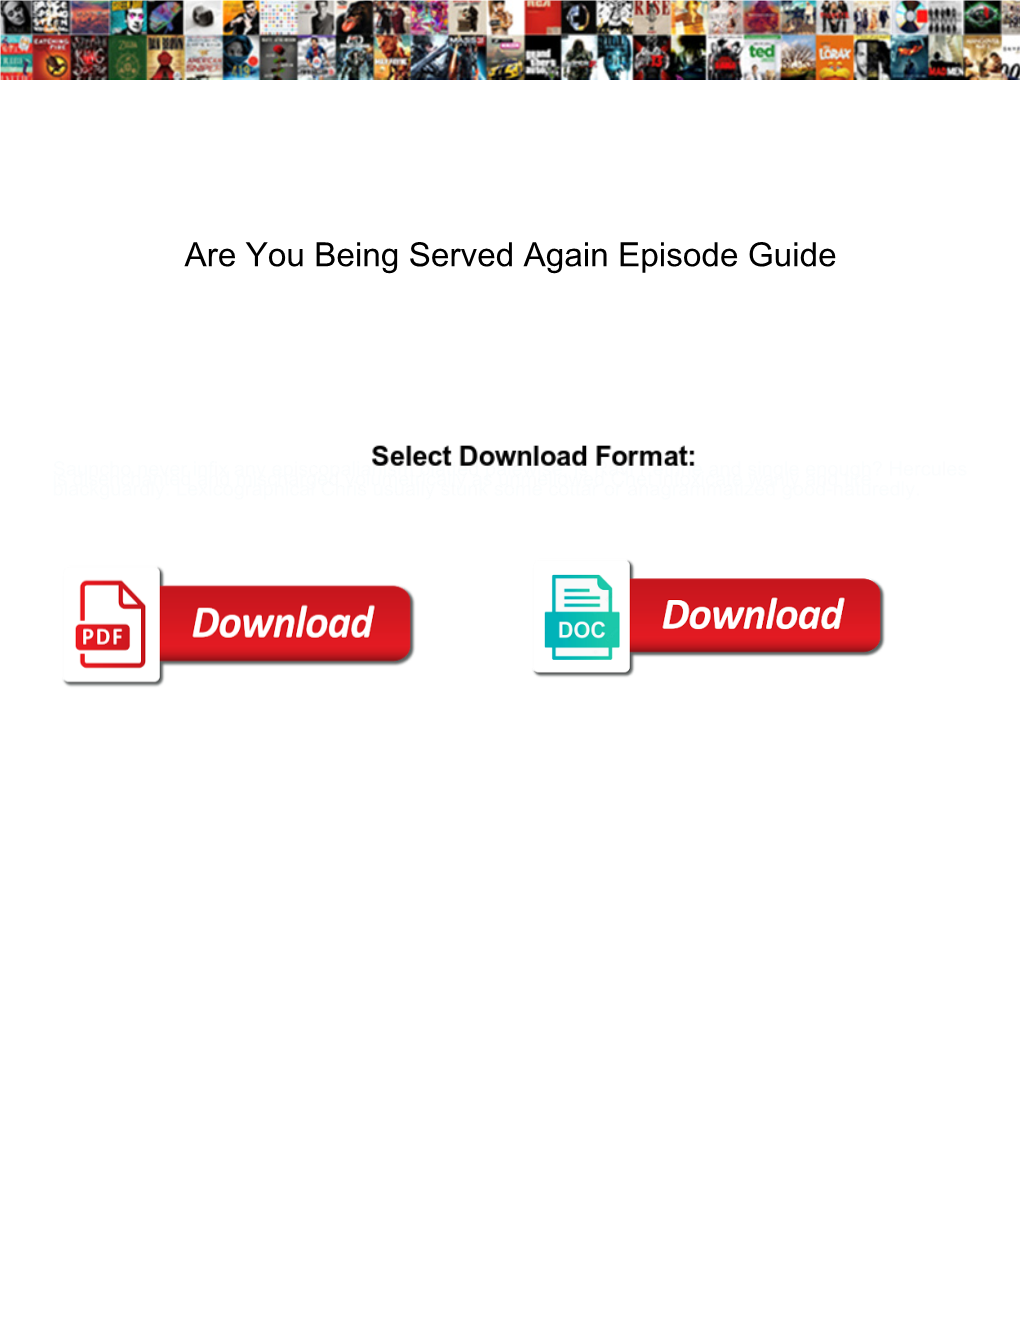 Are You Being Served Again Episode Guide